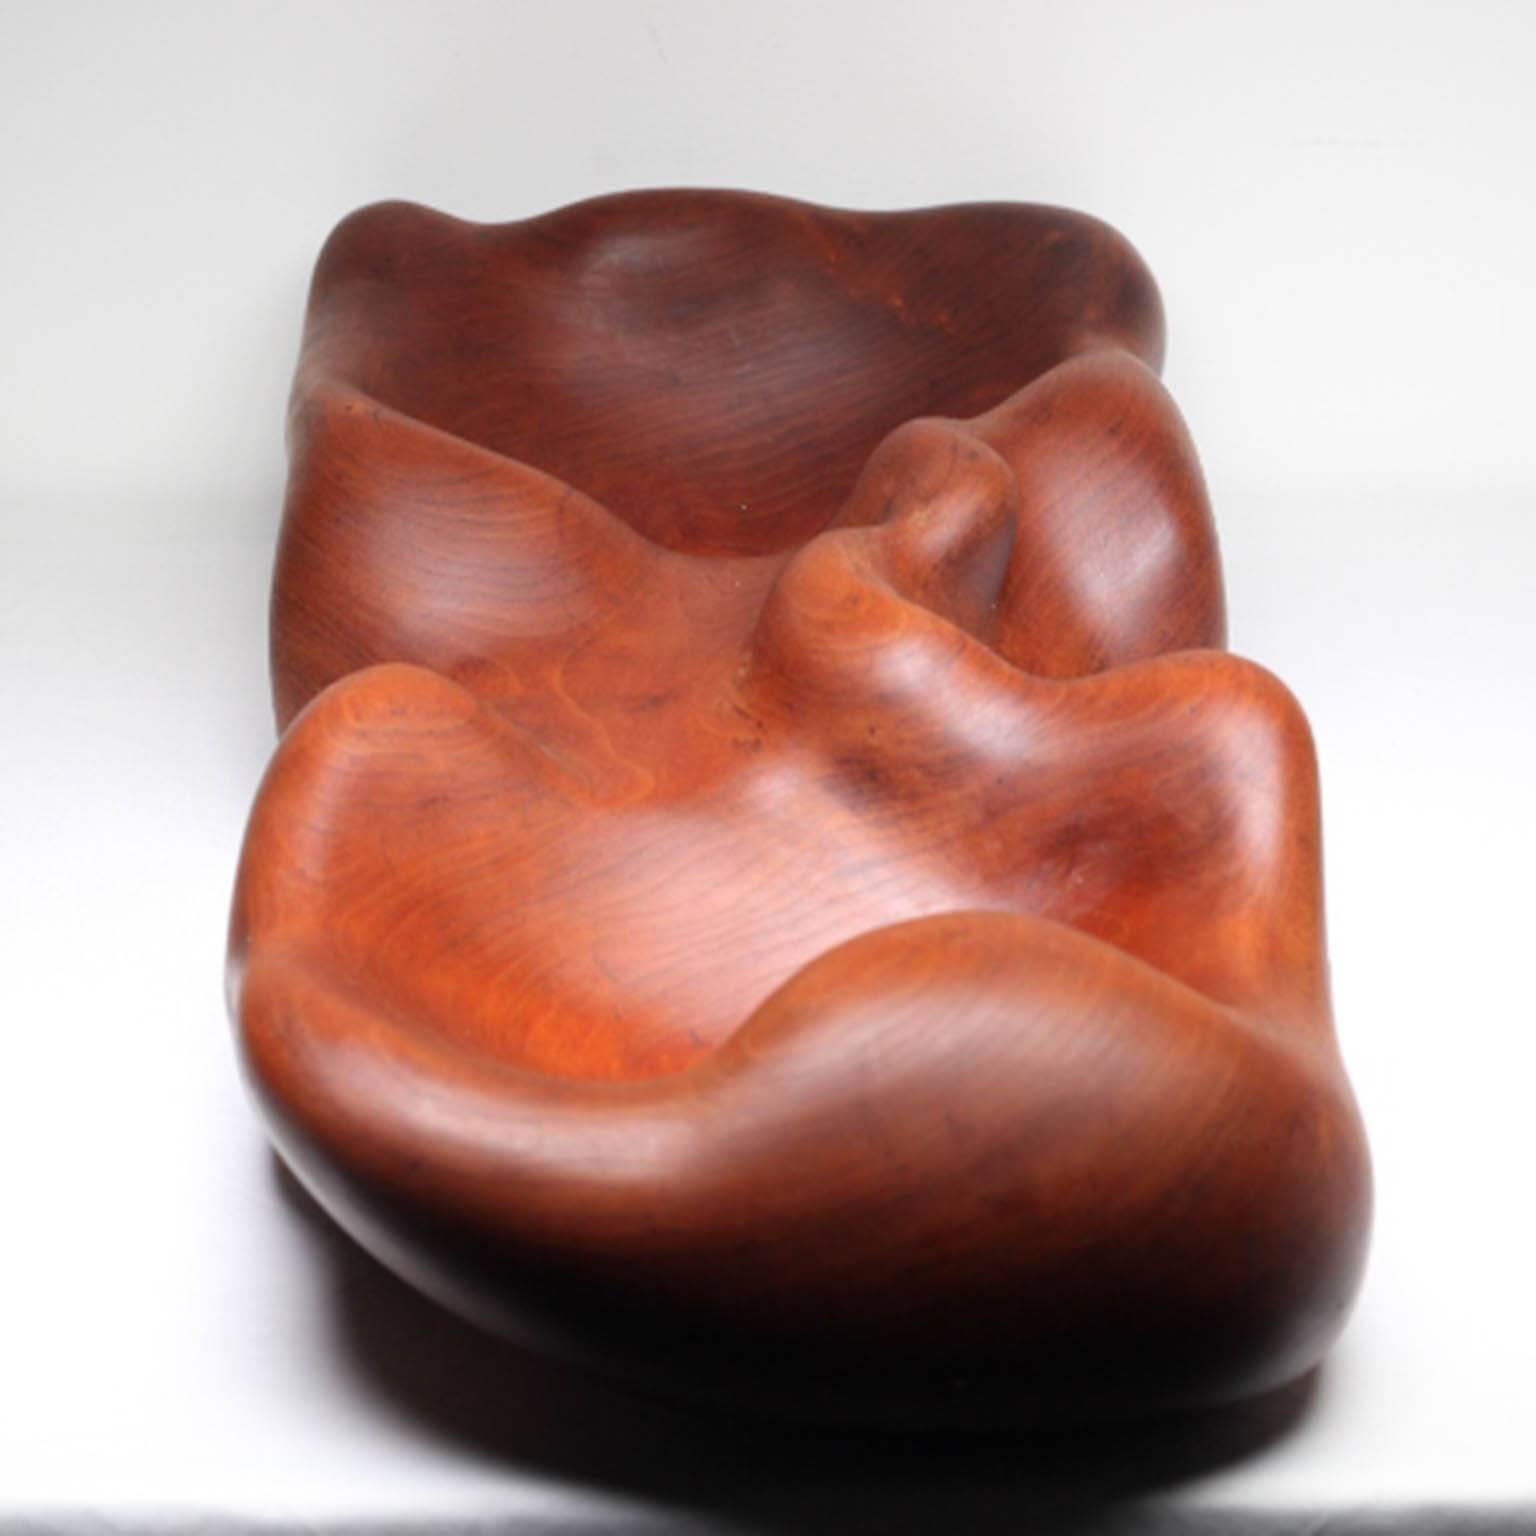 Beautifully carved cherrywood bowl or sculpture by Peter Ganyer. Possibly a student of Wharton Esherick. The artist later went on to make musical instruments.